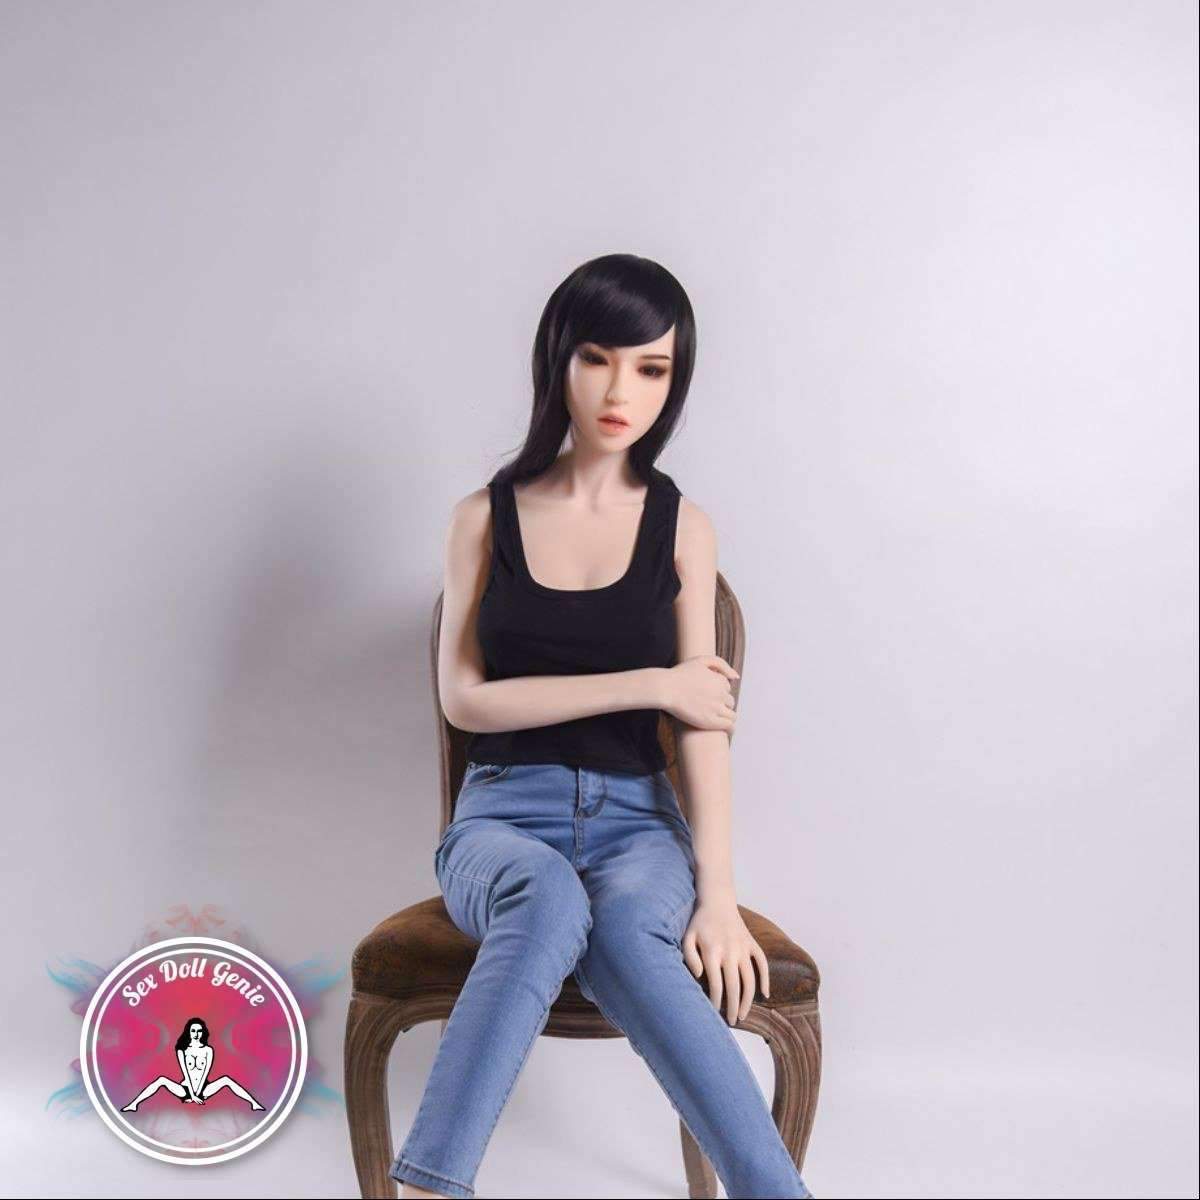 DS Doll - 163Plus - Kayla Head - Type 2 D Cup Silicone Doll-15